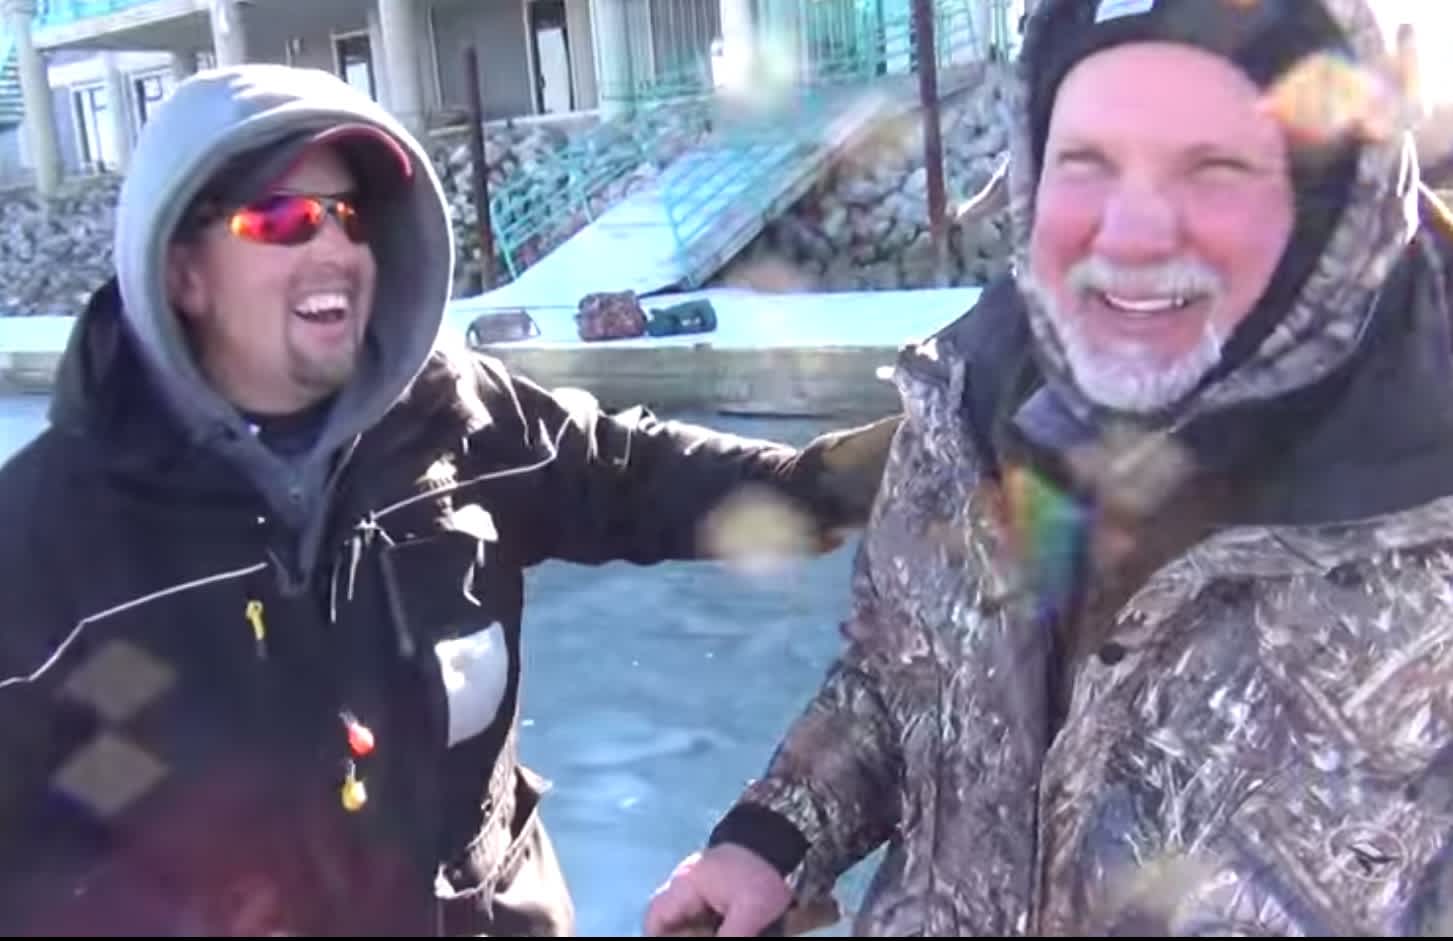 Video: 7 Ways an Ice Fishing Trip Can Take a Turn for the Hilarious